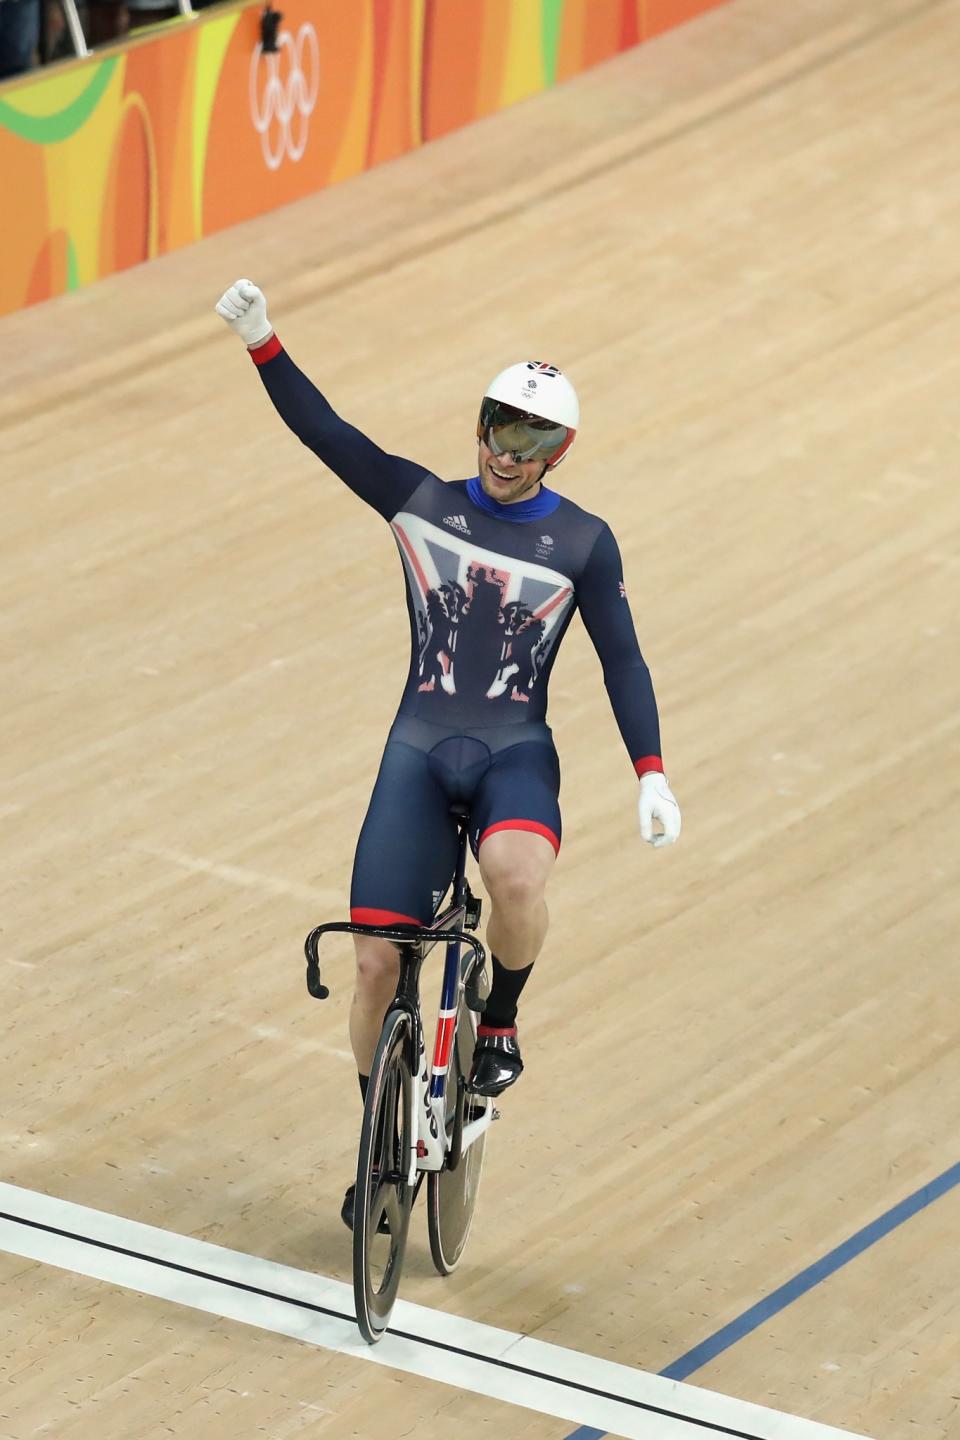 <p>Jason Kenny of Great Britain celebrates winning gold in the Men’s Keirin Finals race on Day 11 of the Rio 2016 Olympic Games at the Rio Olympic Velodrome on August 16, 2016 in Rio de Janeiro, Brazil. (Photo by Rob Carr/Getty Images) </p>